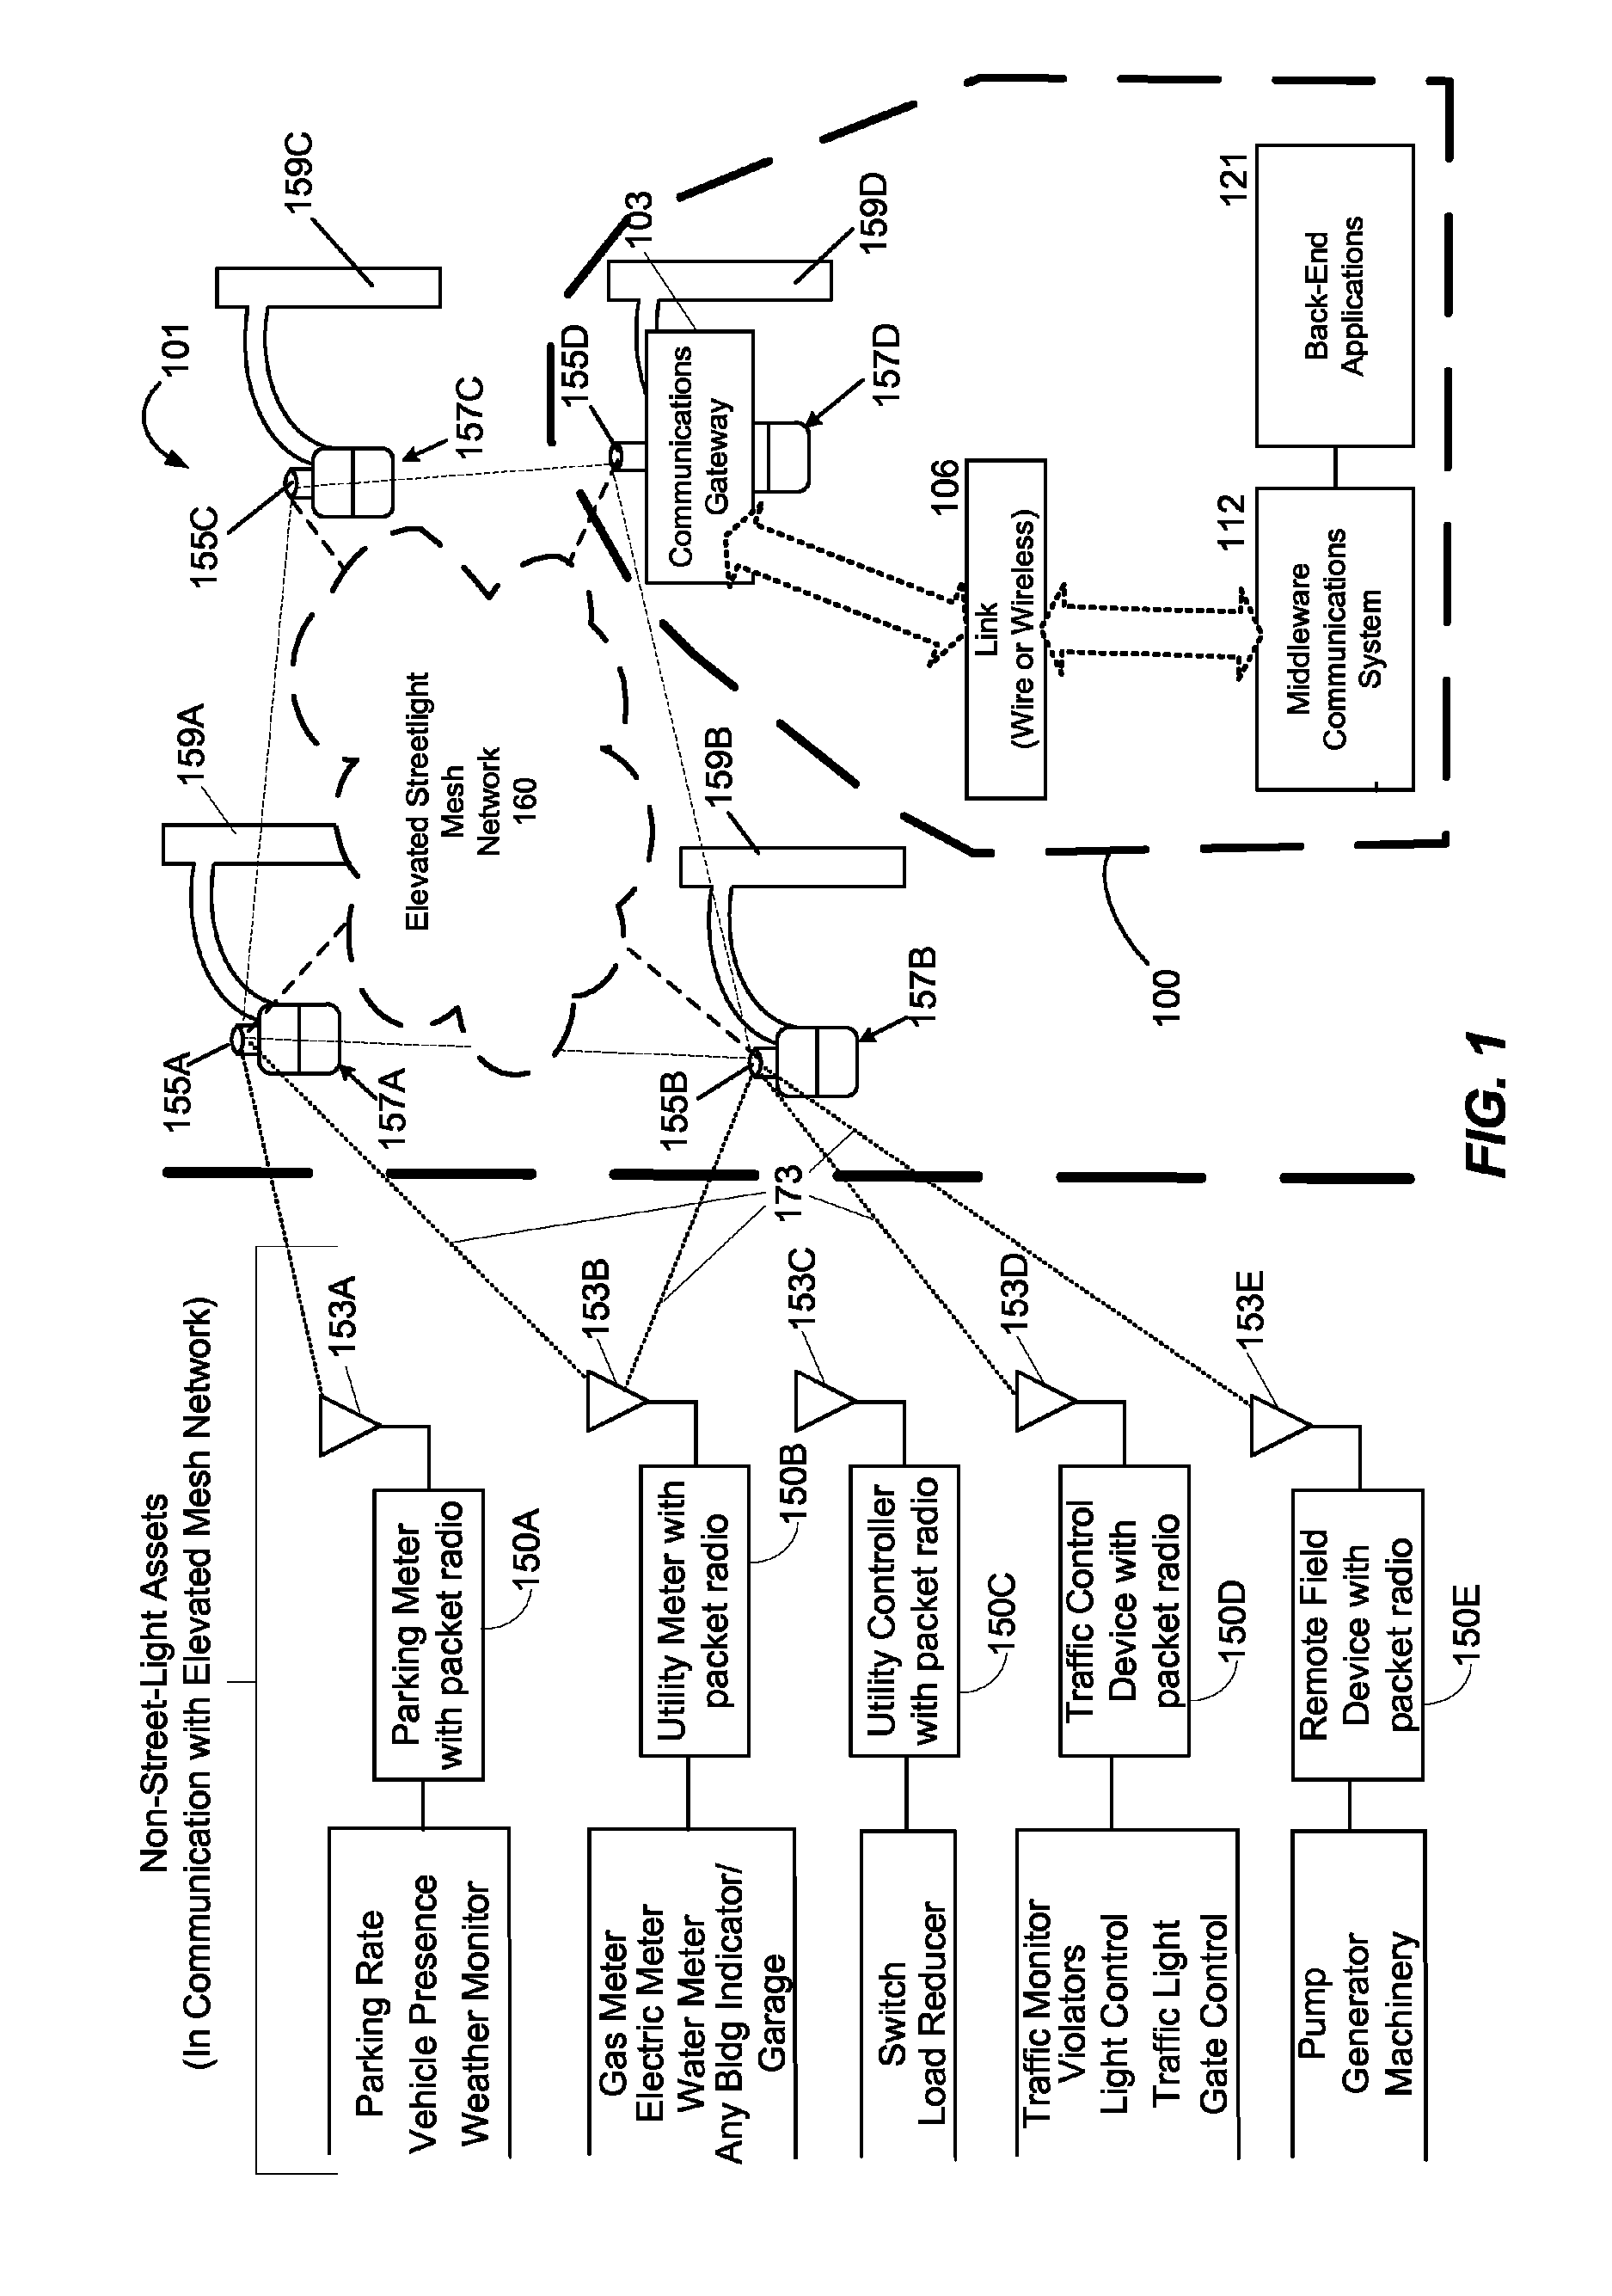 Method and system for remotely monitoring and controlling field devices with a street lamp elevated mesh network